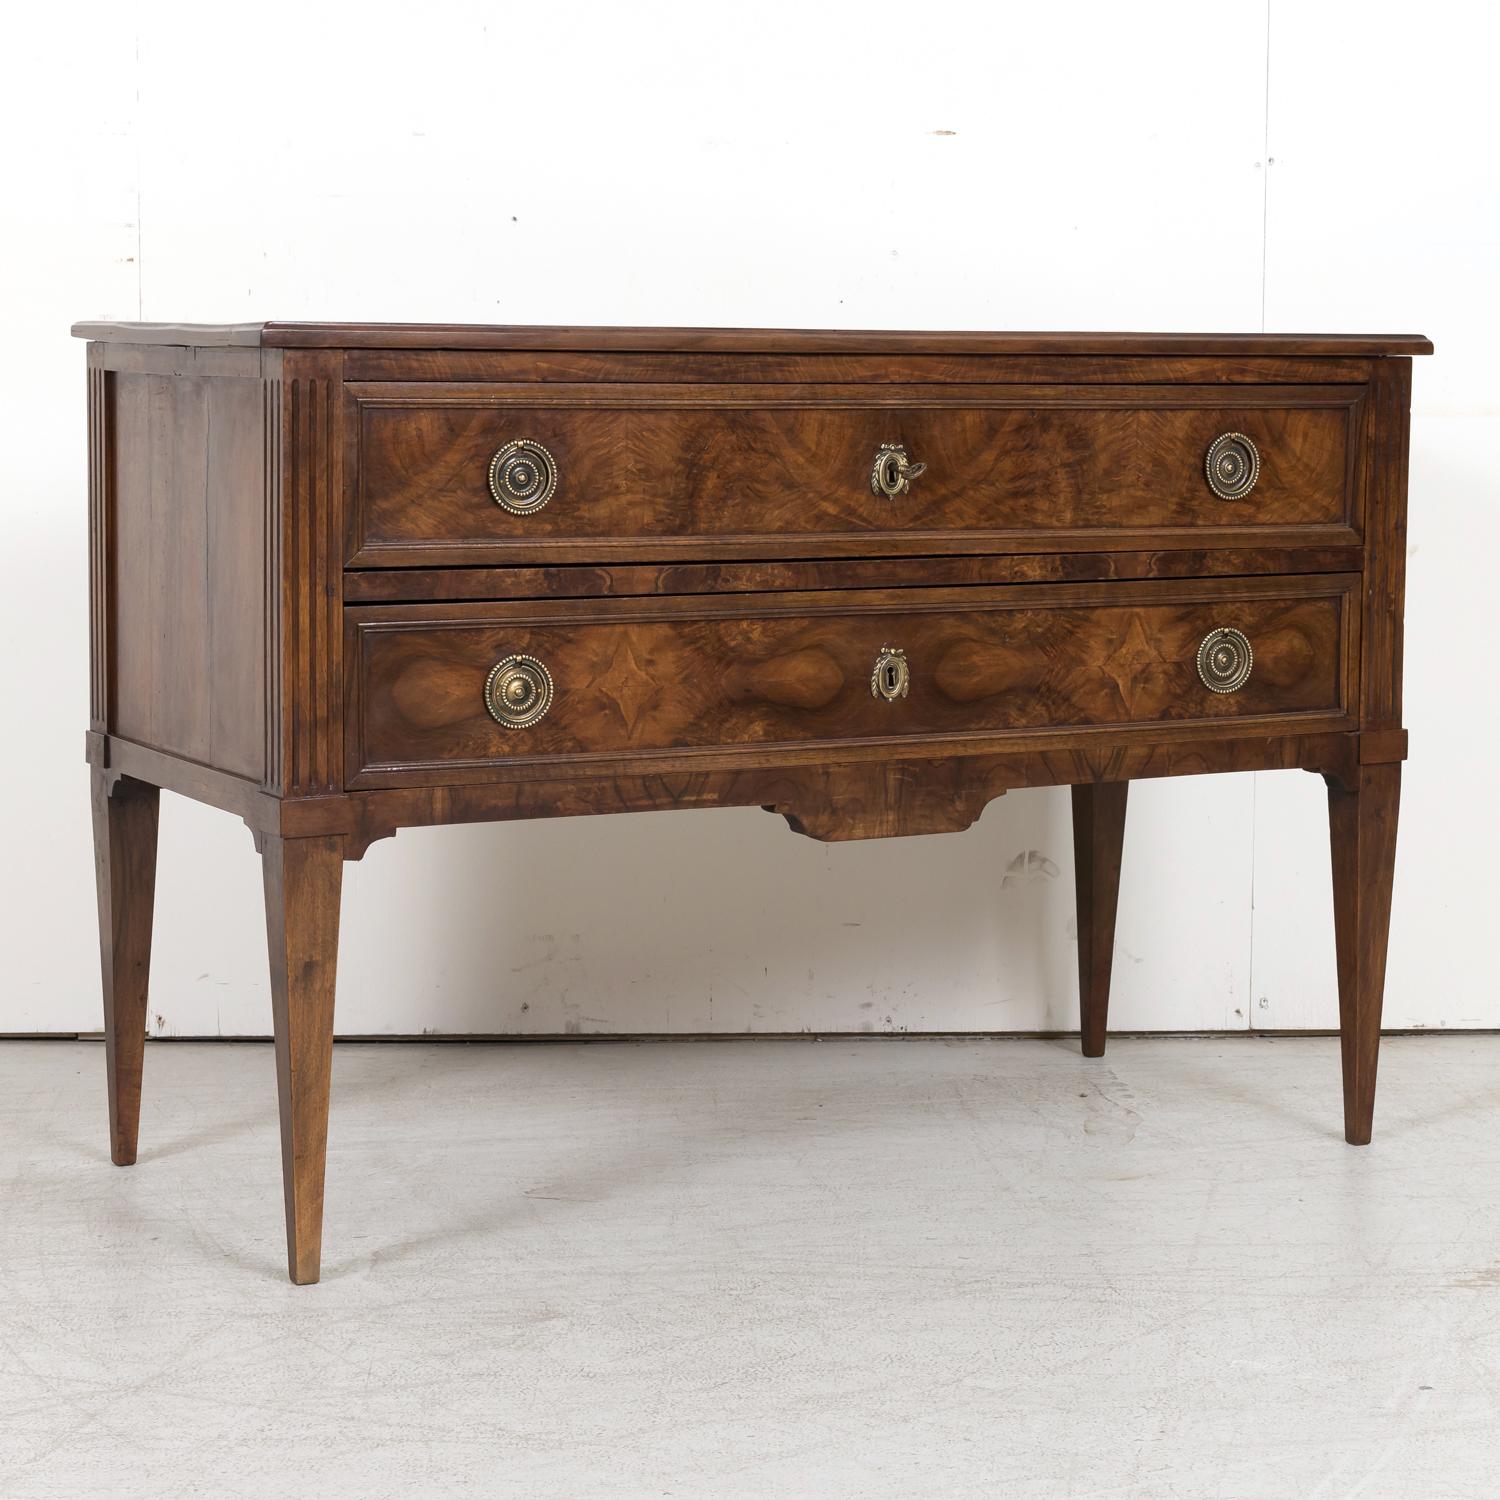 Late 19th Century 19th Century French Louis XVI Style Walnut and Burled Walnut Commode Sauteuse